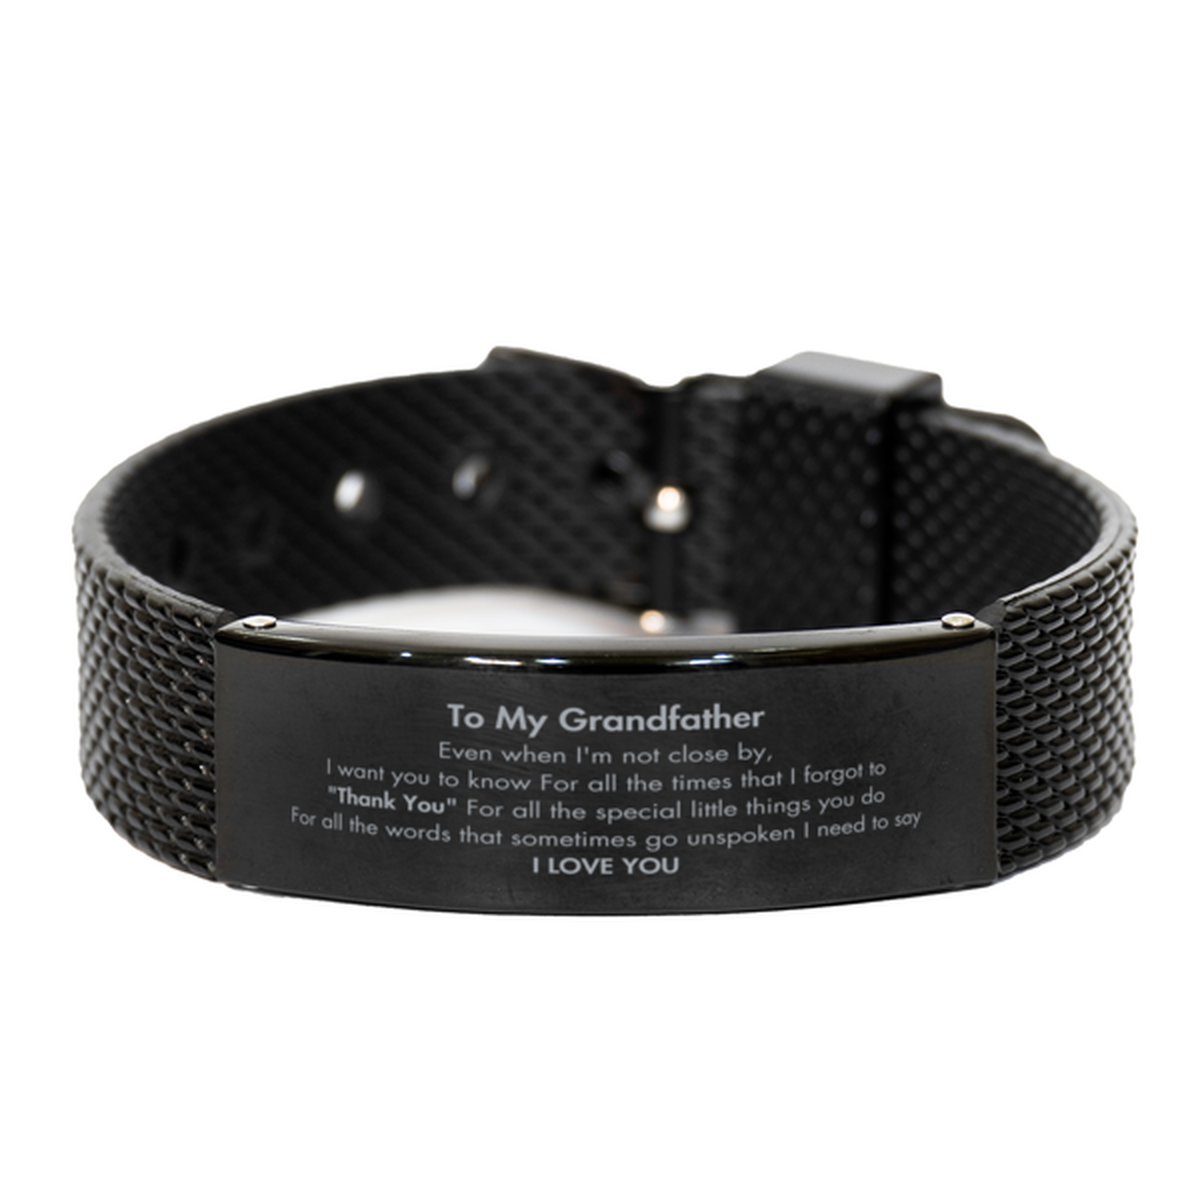 Thank You Gifts for Grandfather, Keepsake Black Shark Mesh Bracelet Gifts for Grandfather Birthday Mother's day Father's Day Grandfather For all the words That sometimes go unspoken I need to say I LOVE YOU